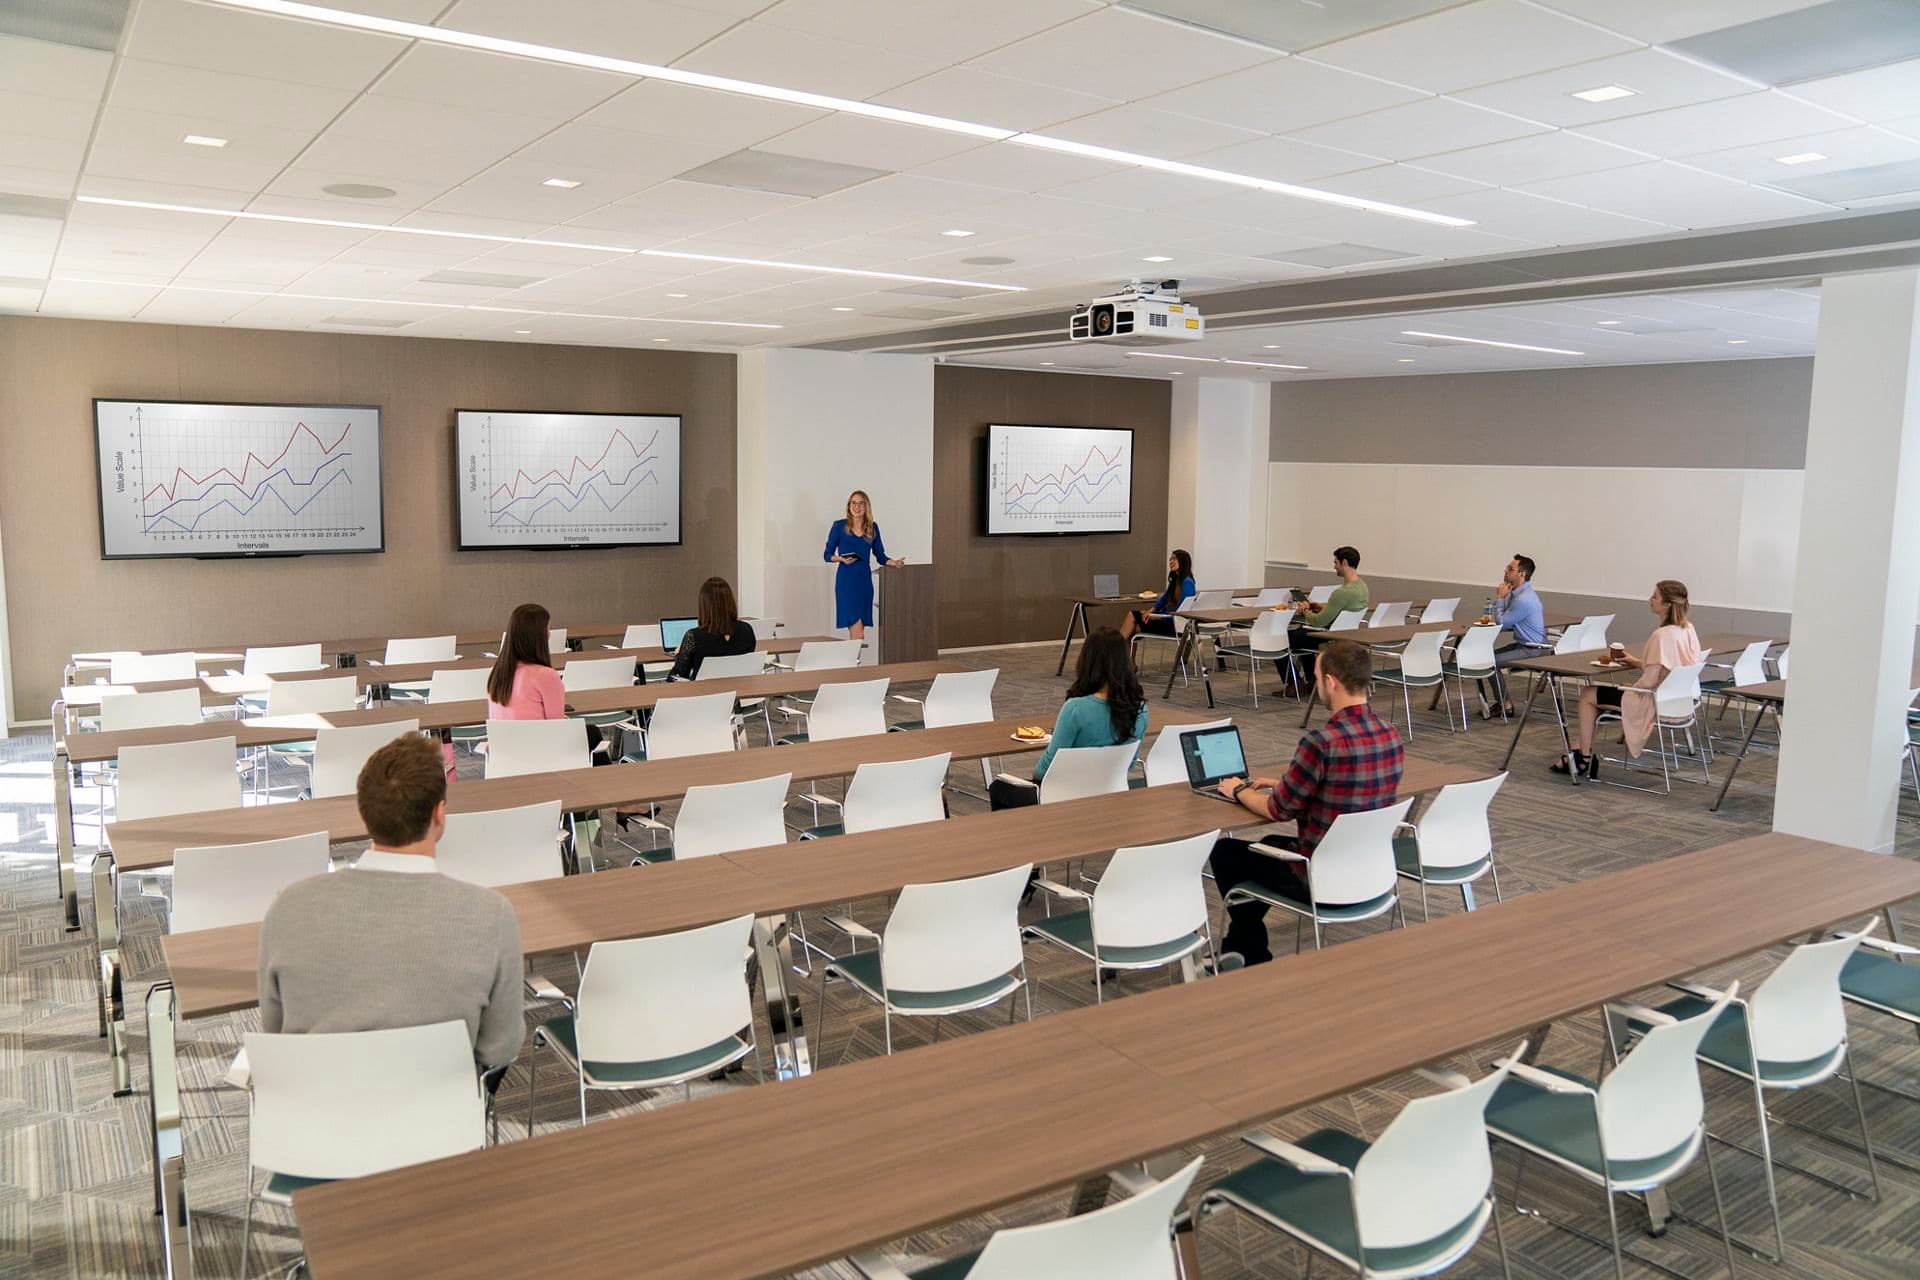 Lifestyle interior photography of the conference center at UCI Research Park - 5301 California Ave, Irvine, CA